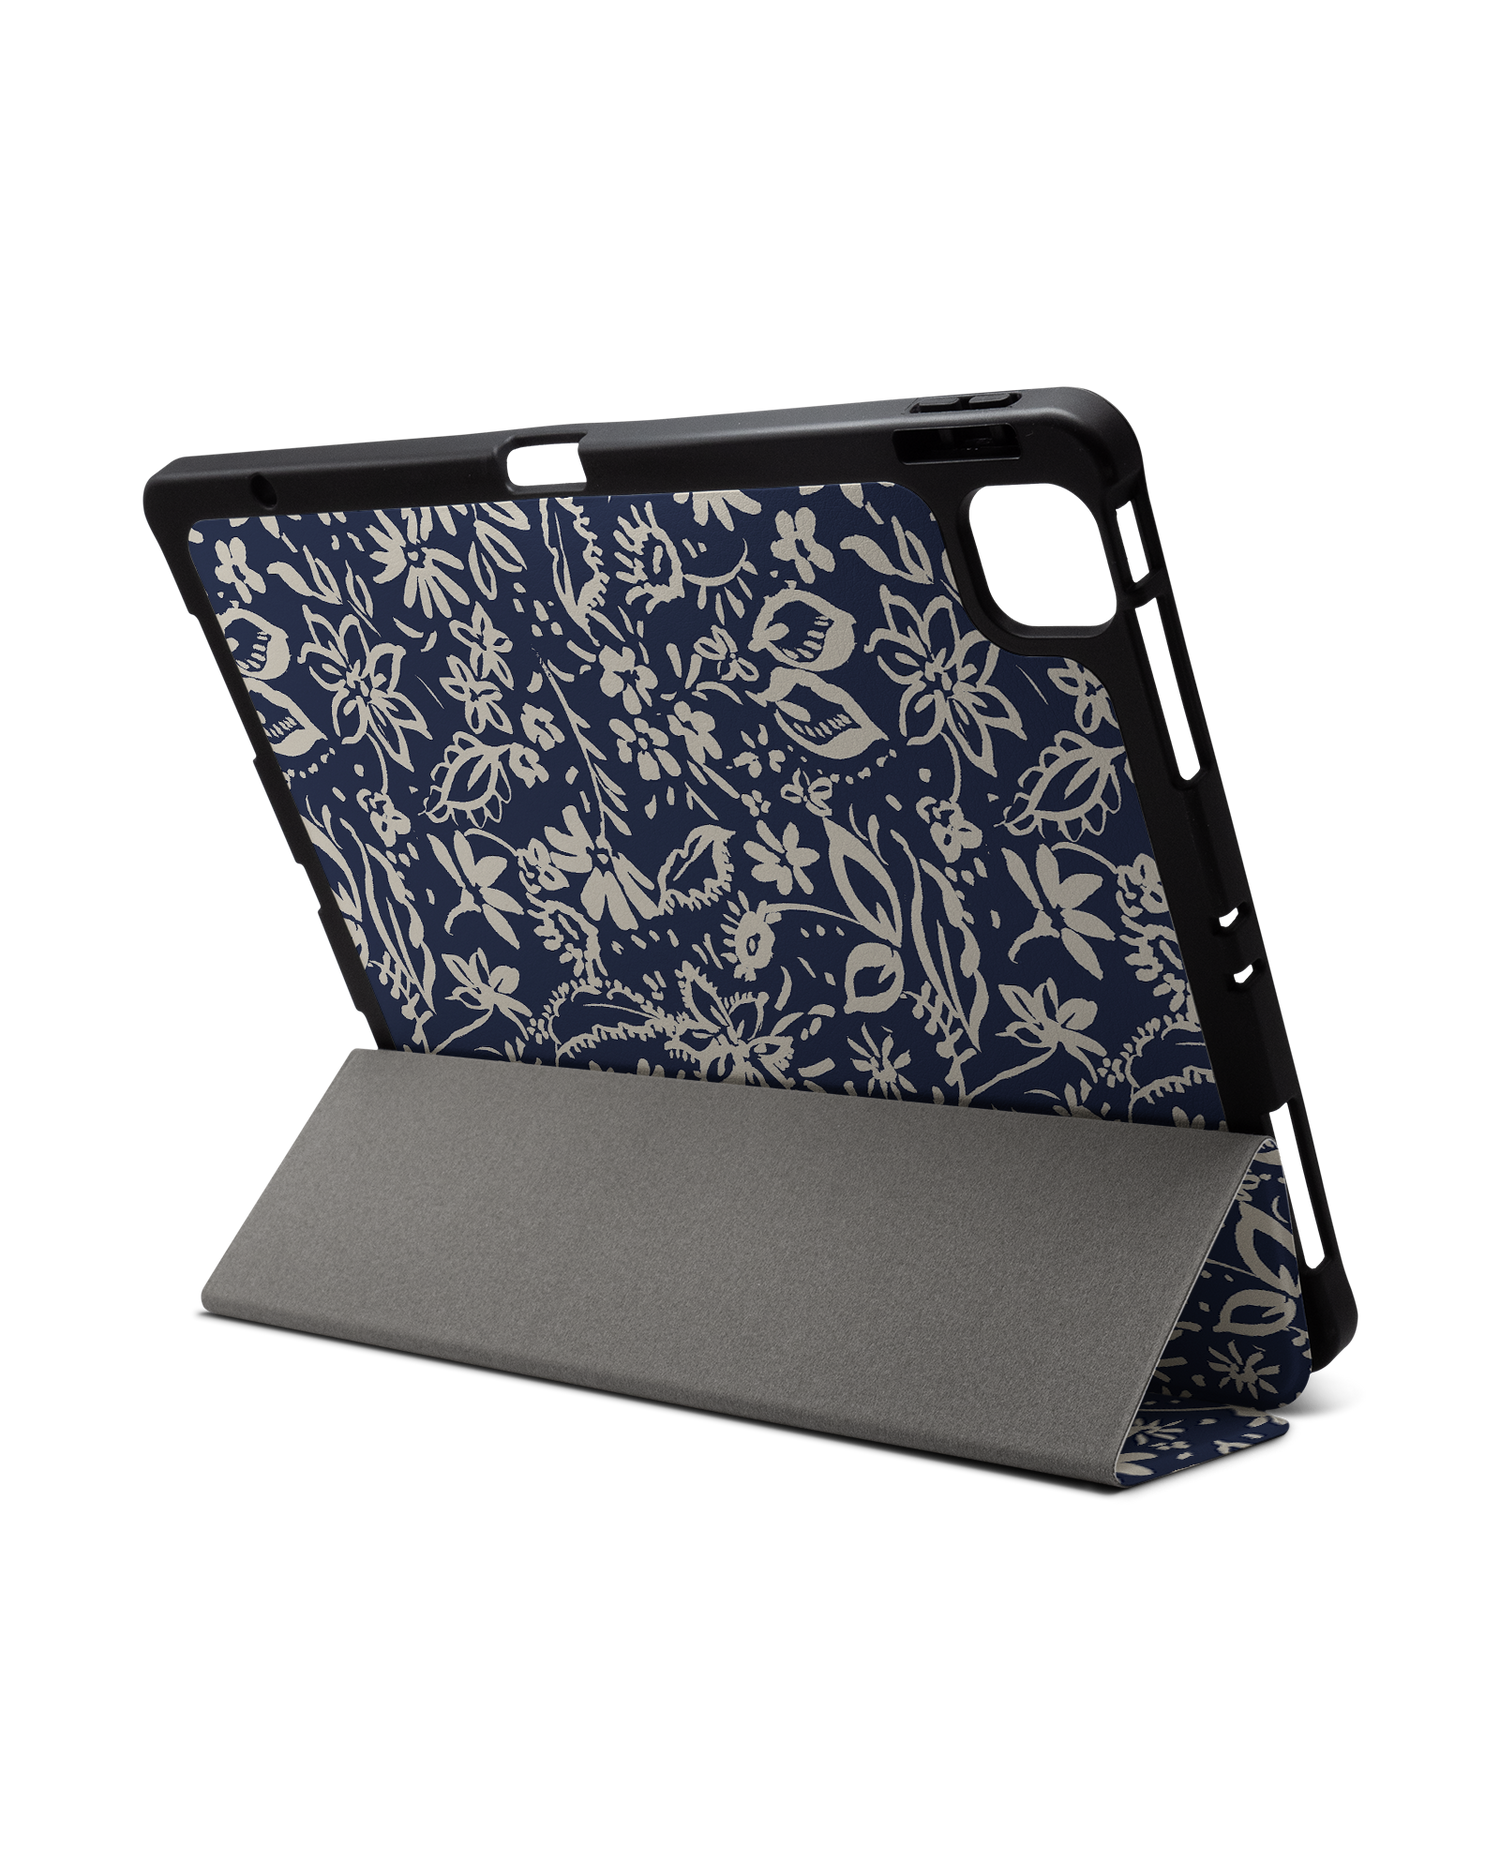 Ditsy Blue Paisley iPad Case with Pencil Holder for Apple iPad Pro 6 12.9